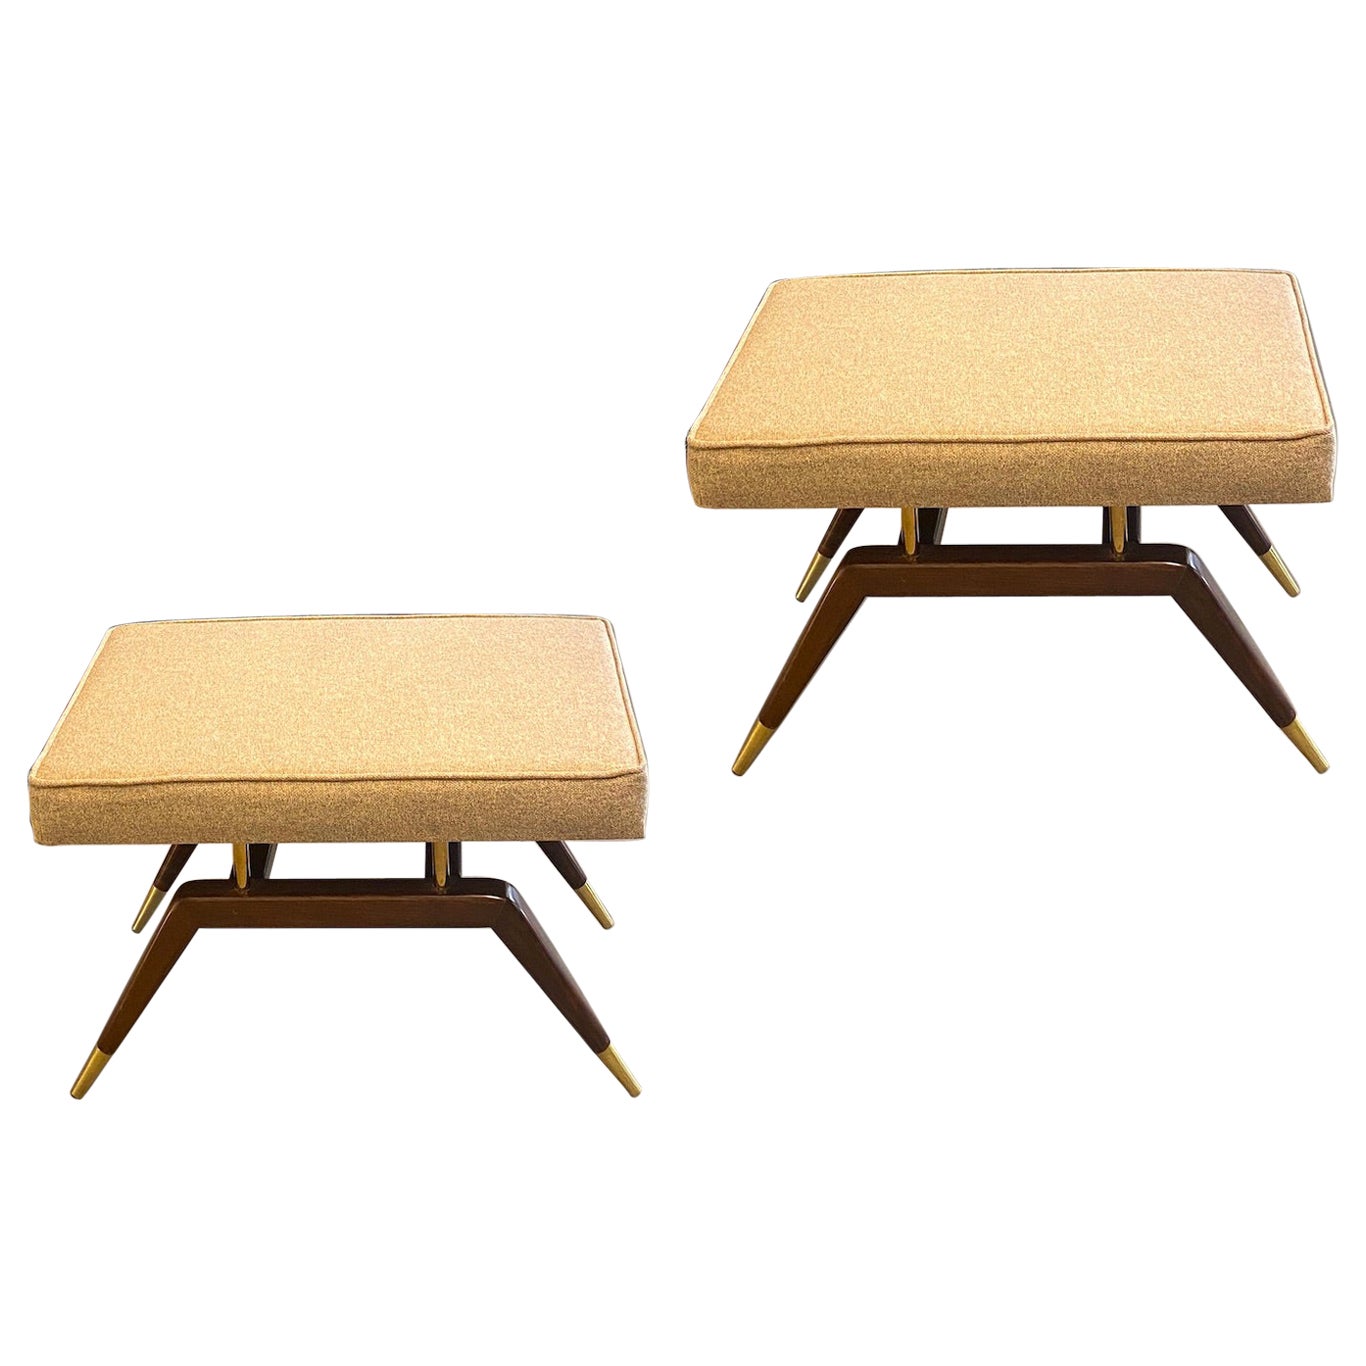 Pair of Modern Gio Ponti Style Window Benches or Settees 